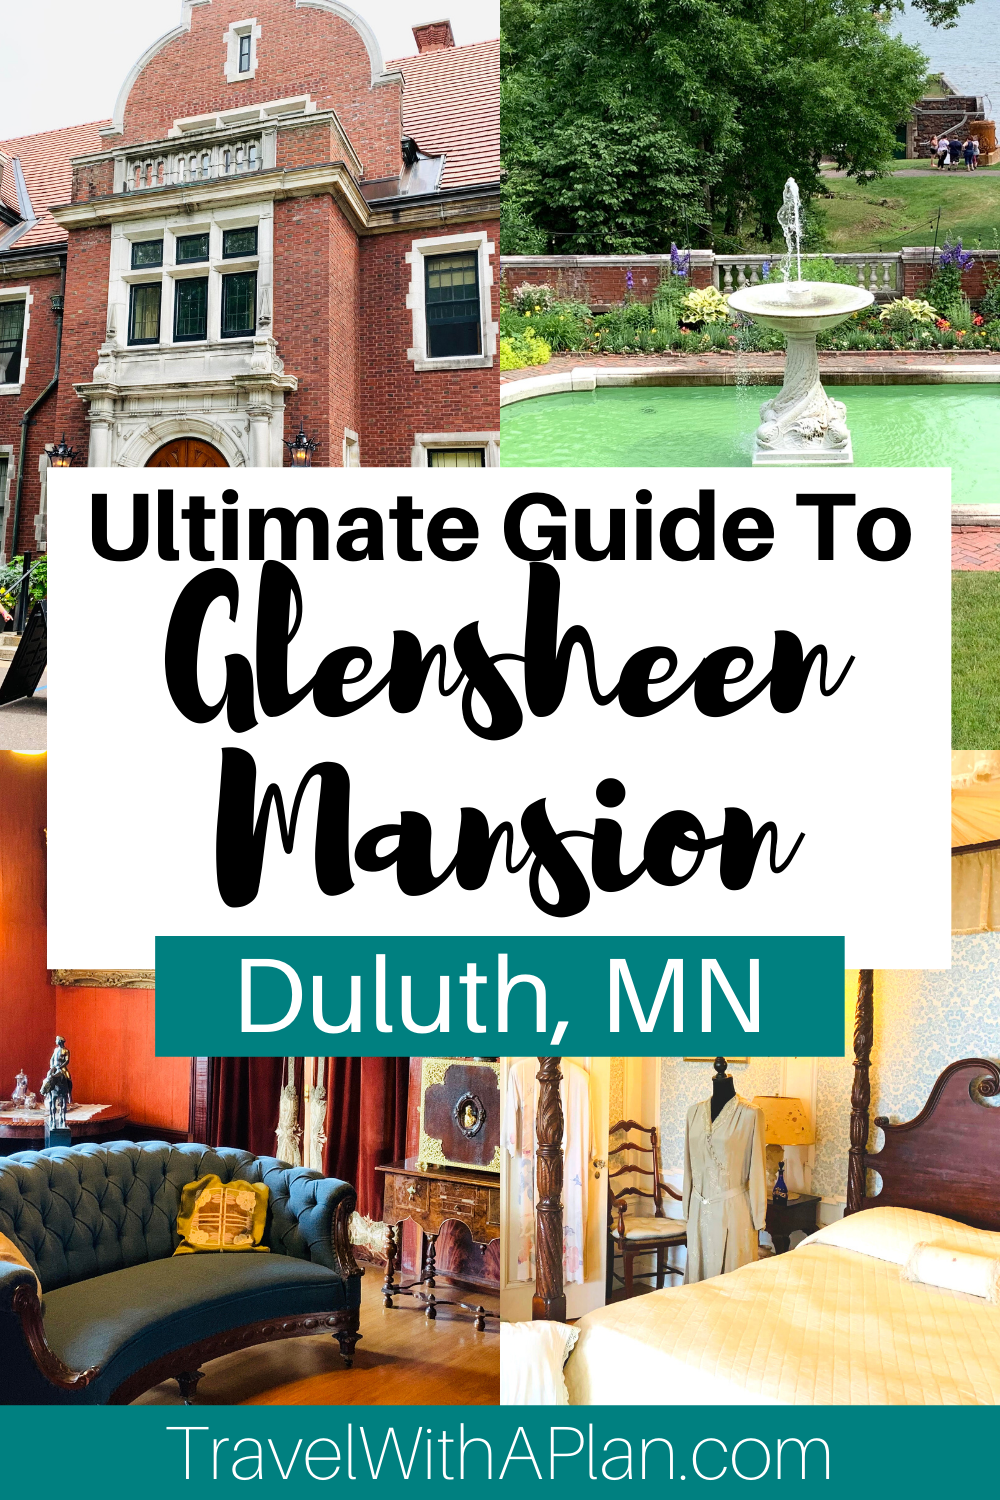 Looking for a description as well as the best tips for Glensheen Mansion Tours?  We'll fill you in on what to expect from your tour as well as let you know if the ticket price is worth it.  #Glensheen #DuluthMN #NorthShore #Historichomes #Minnesota #familytravel #GlensheenMansion #thingstodoinDuluth